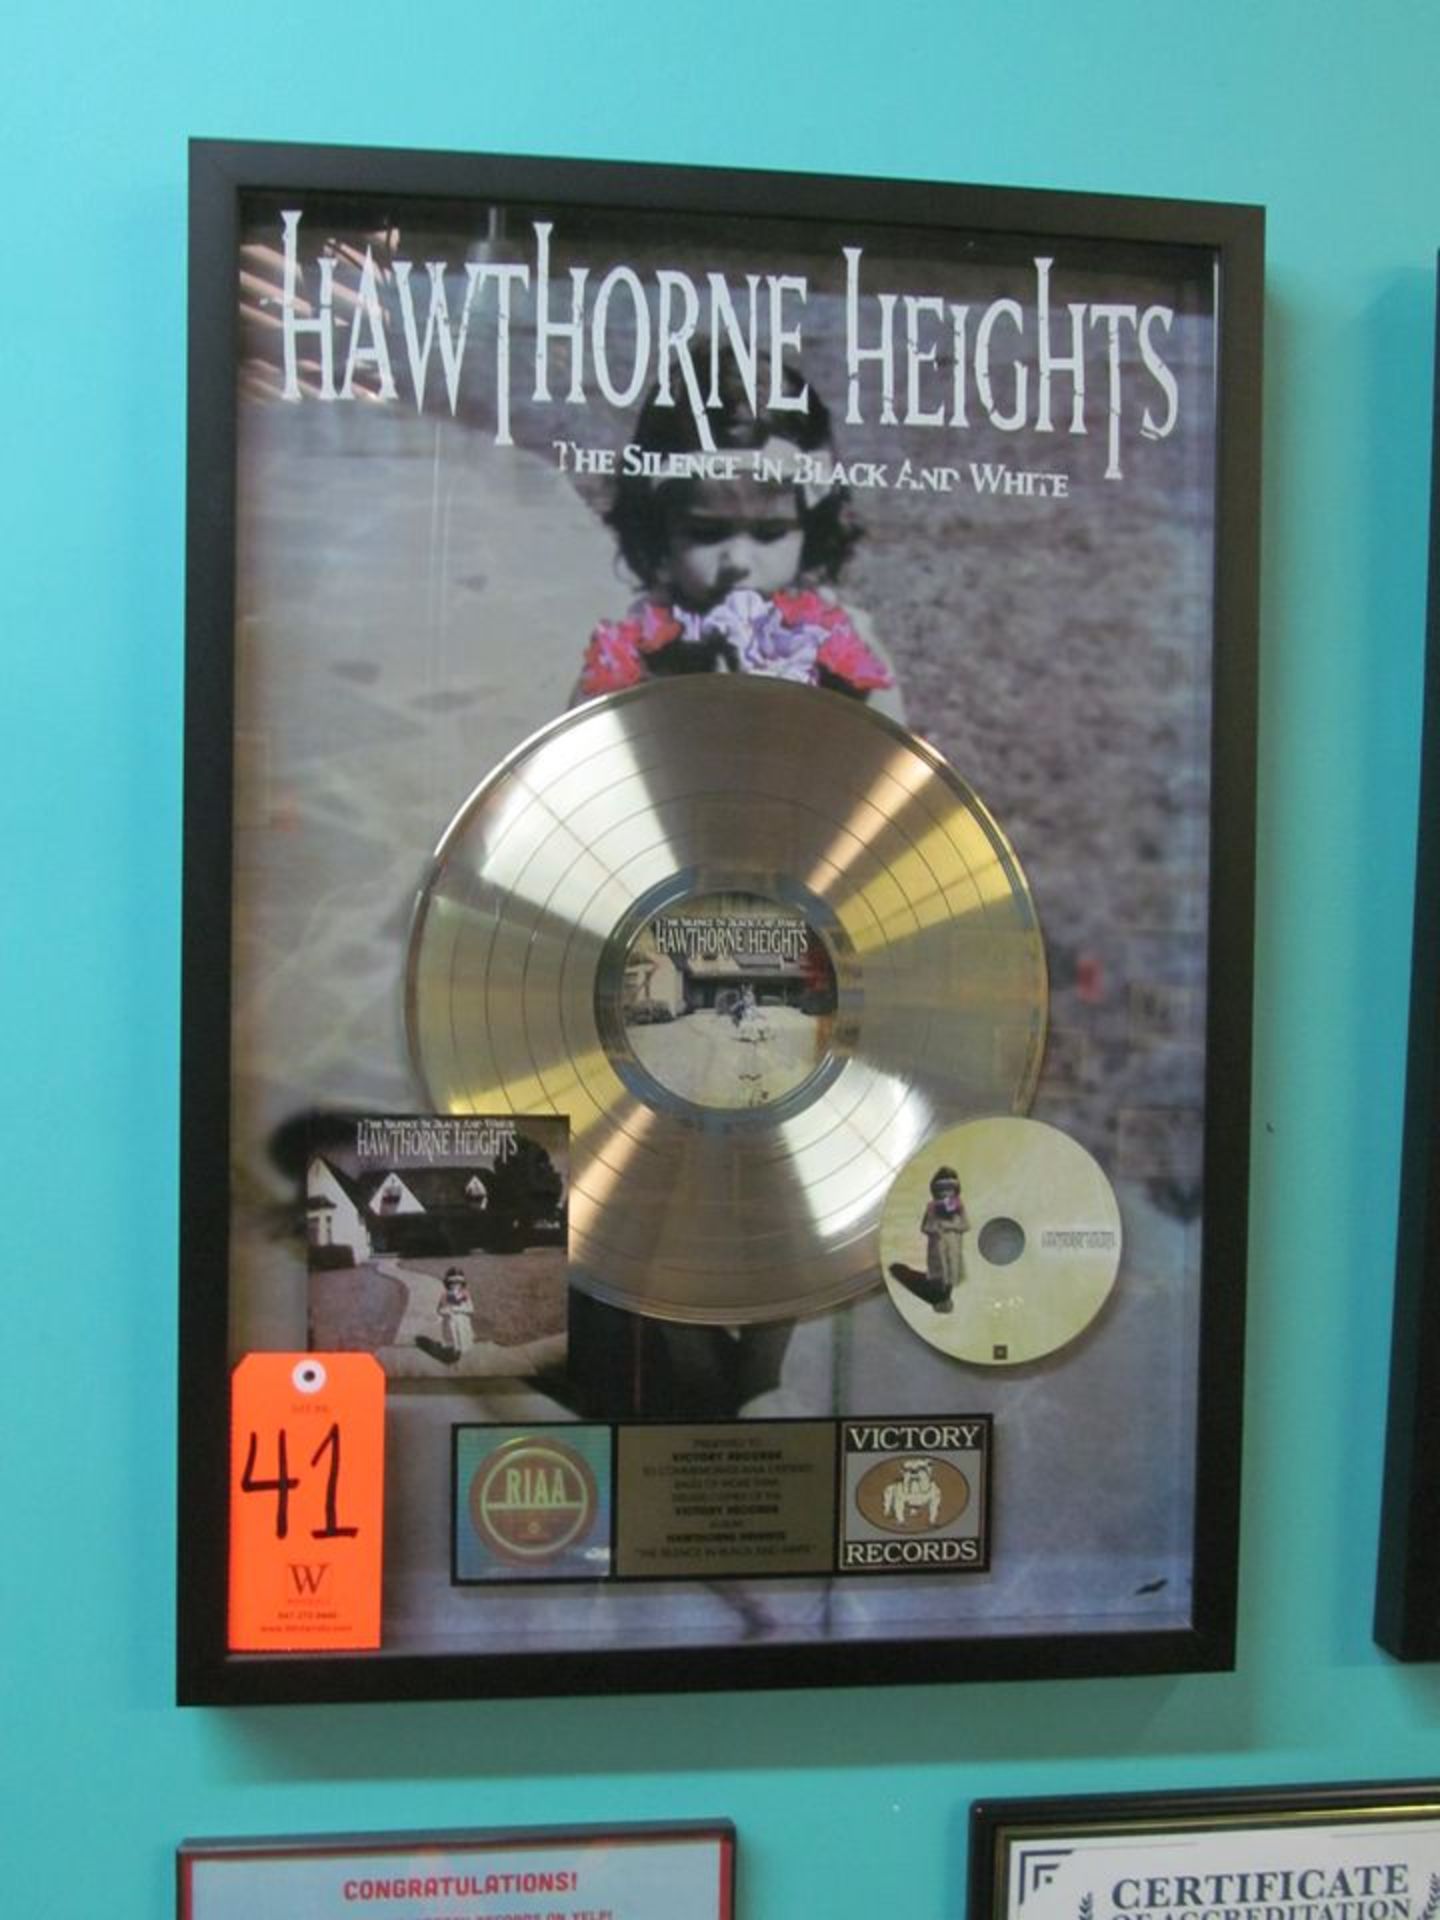 RIAA Certified Gold Record for the Album "The Silence in Black and White" by Hawthorne Heights, to